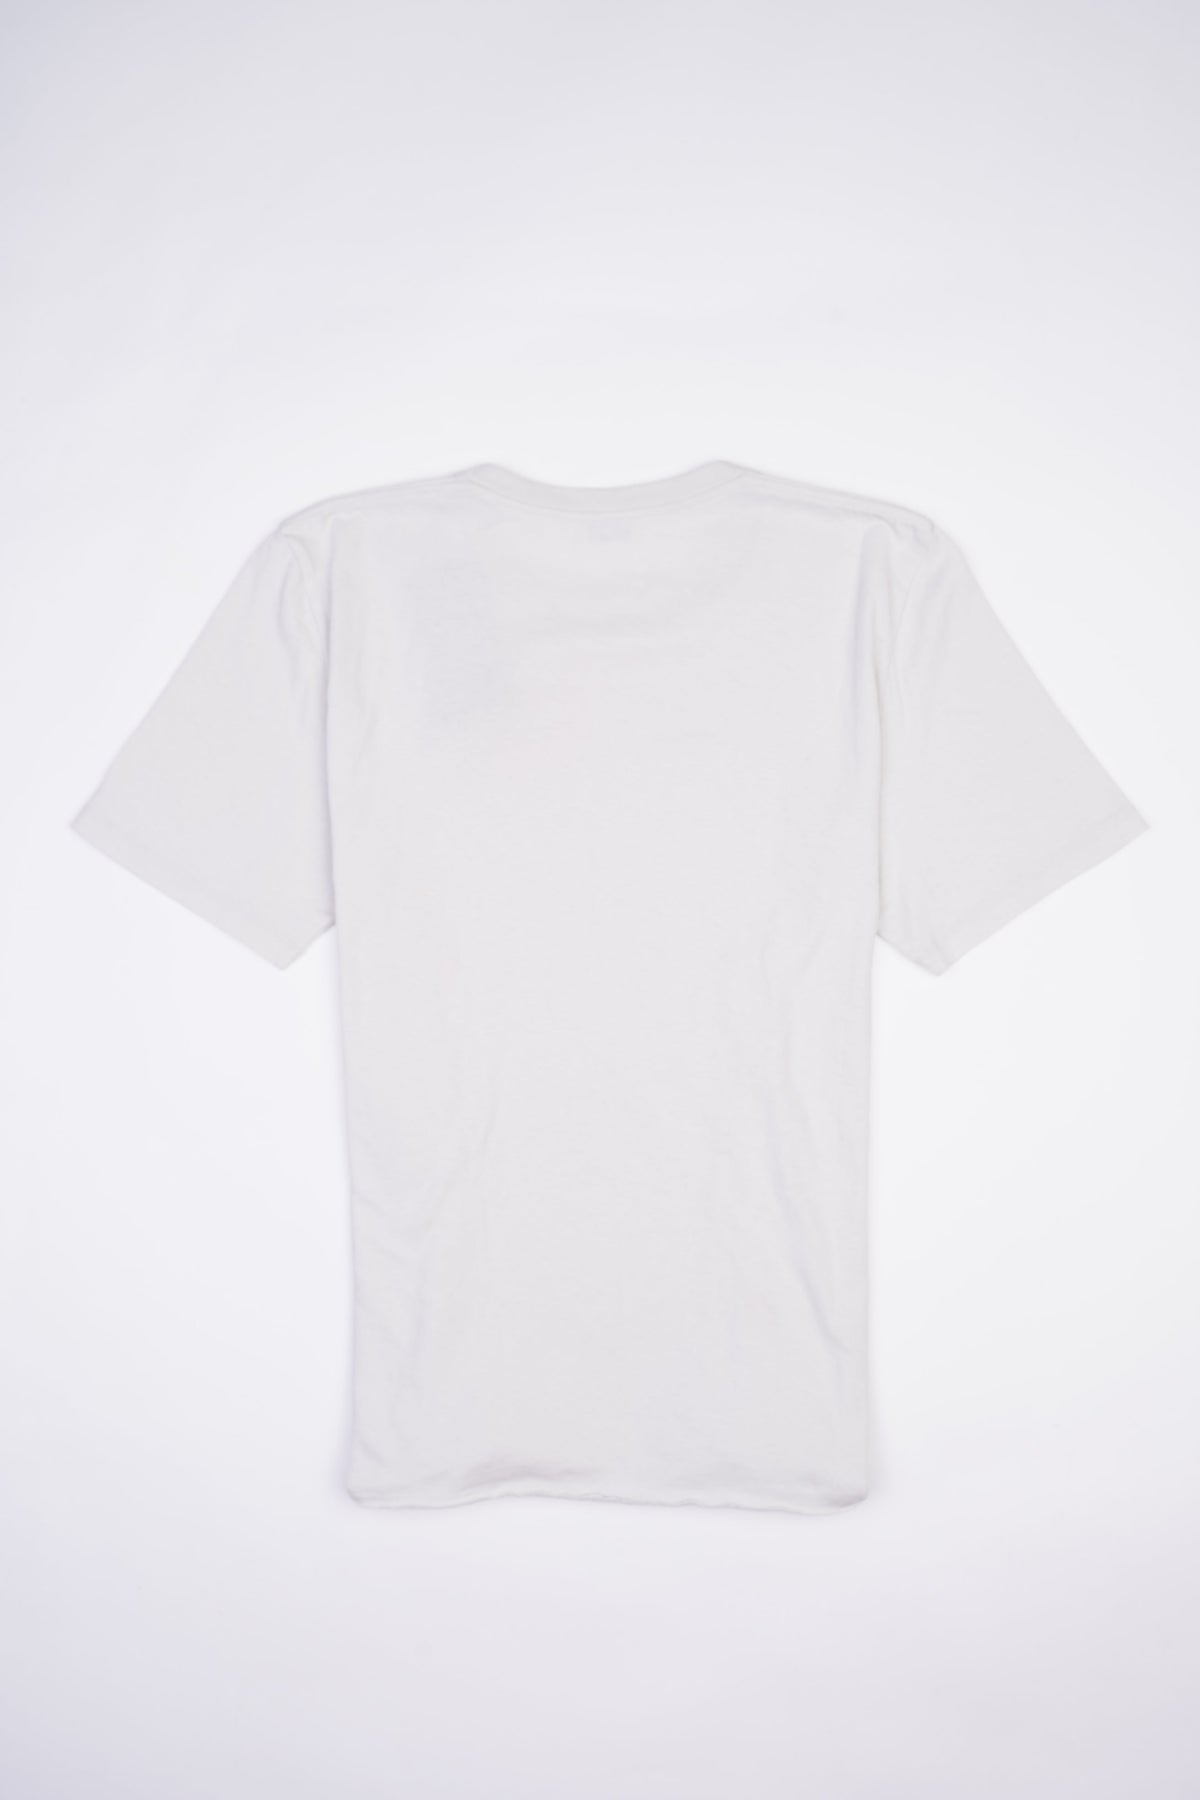 Louis Vuitton Womens T-Shirts, White, L*Inventory Confirmation Required